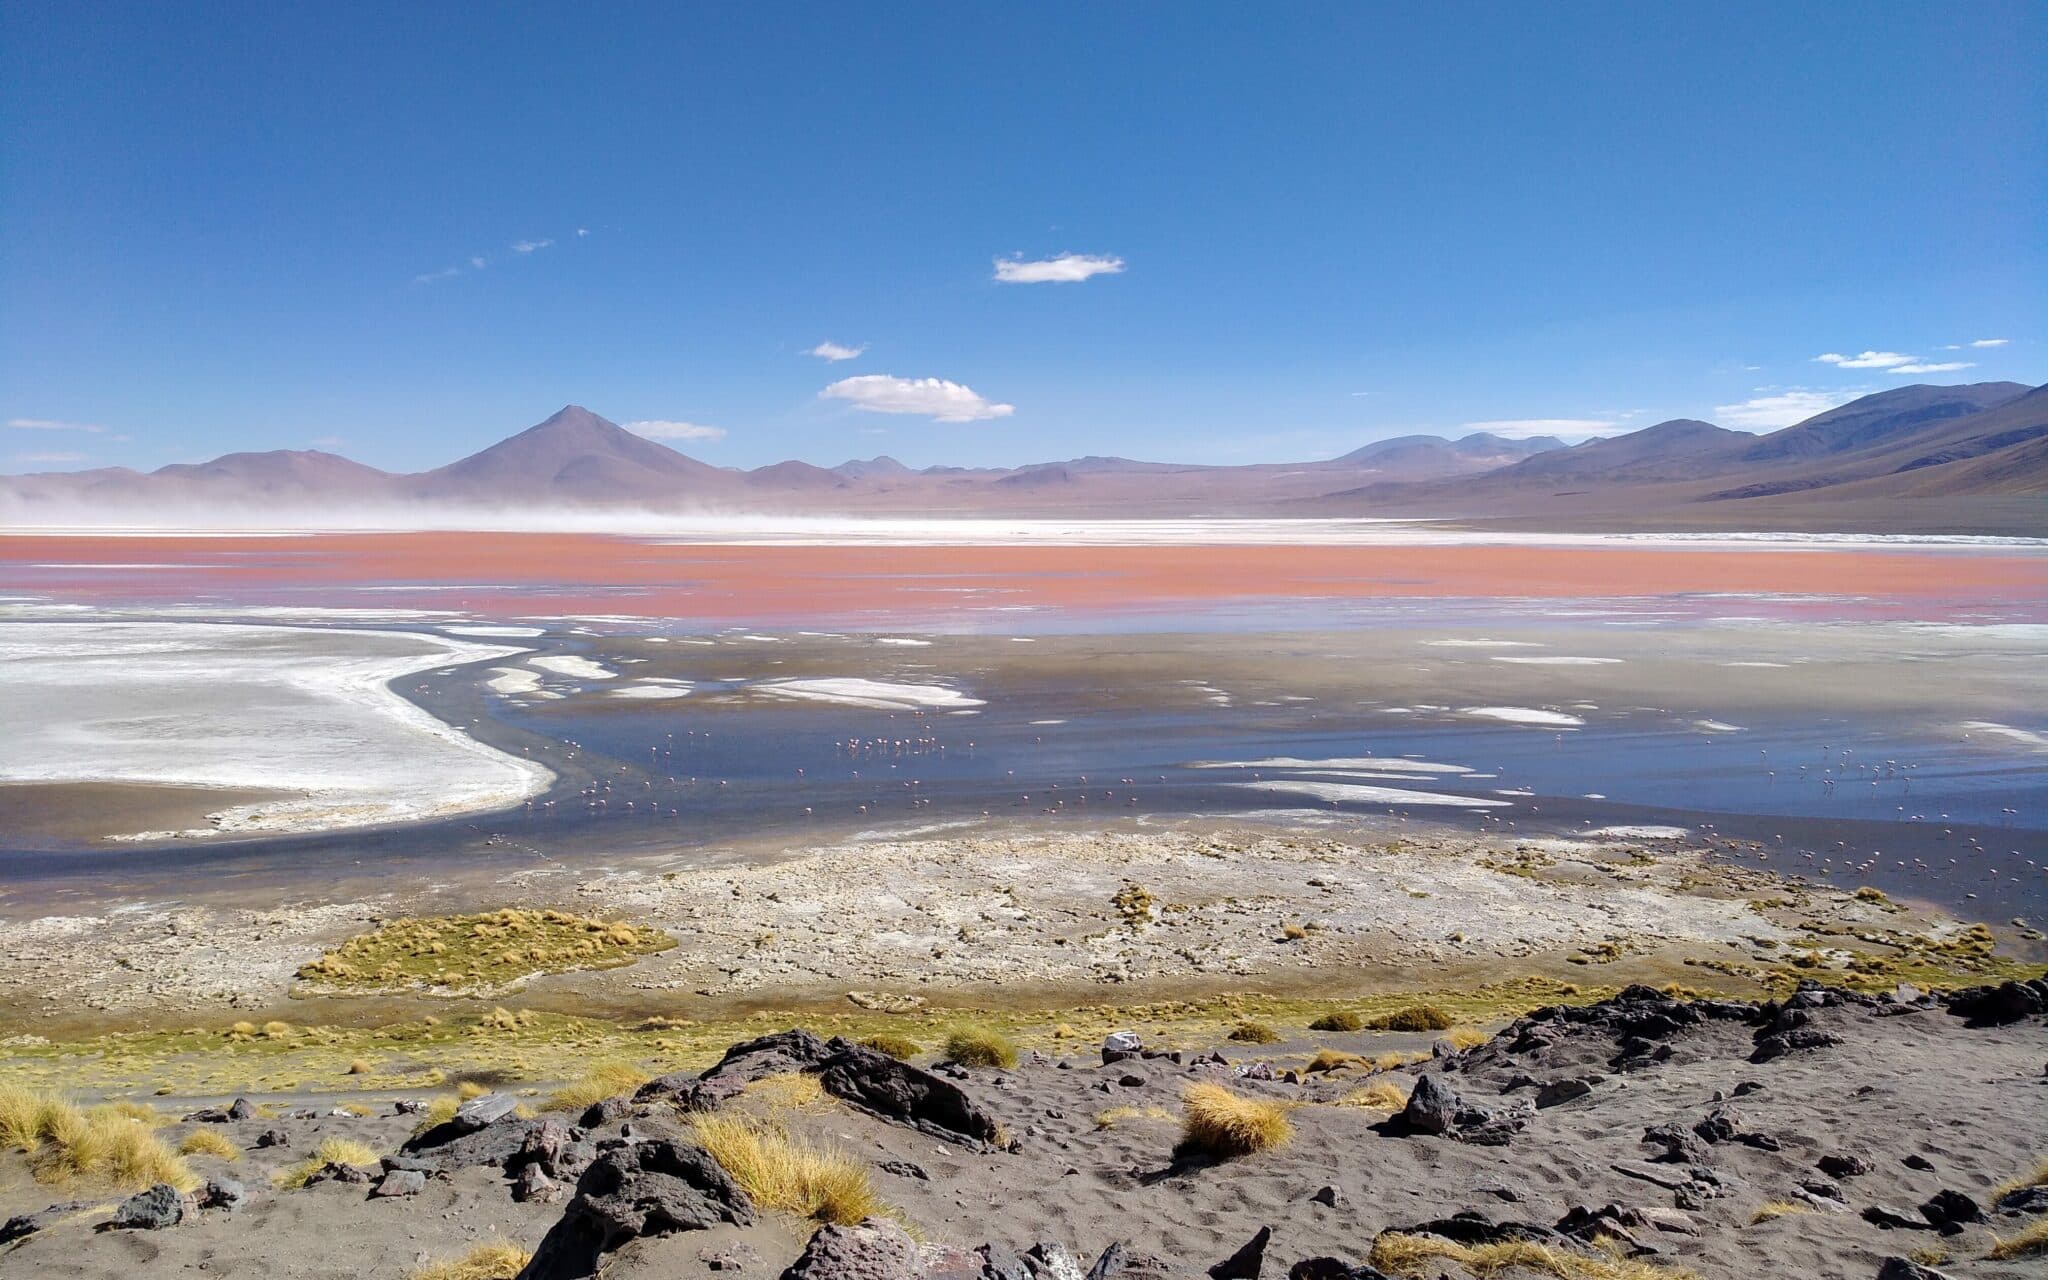 The Laguna Colorada, A Red Lake, In Which Flamingos Live, In The Background Purple Shimmering Mountain Landscapes.